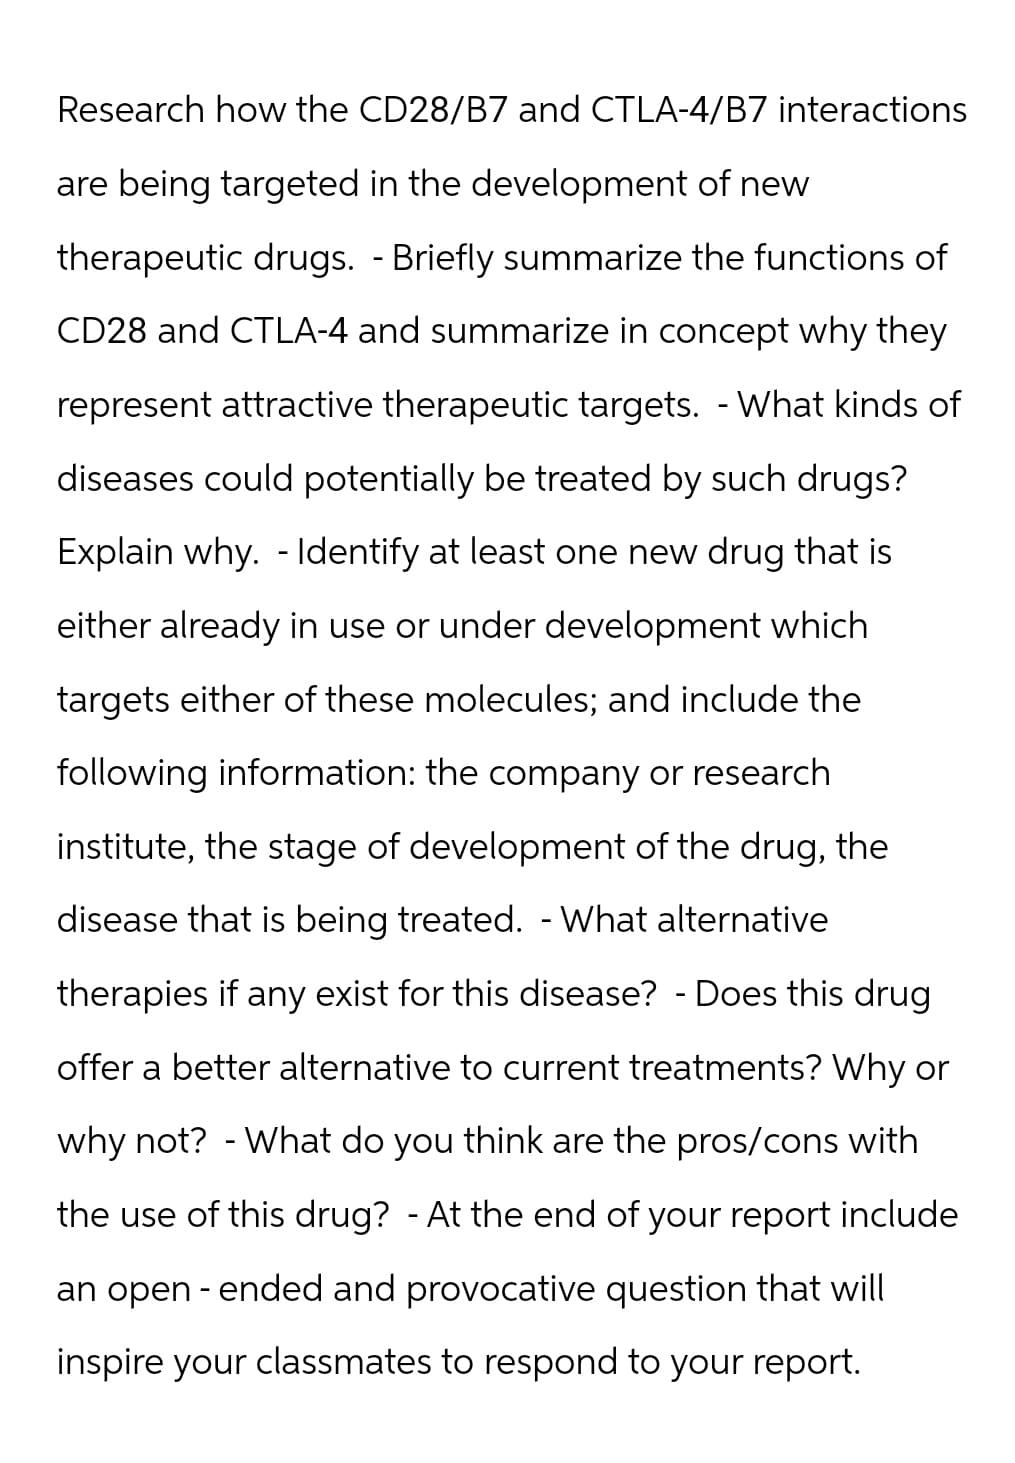 Research how the CD28/B7 and CTLA-4/B7 interactions
are being targeted in the development of new
therapeutic drugs. - Briefly summarize the functions of
CD28 and CTLA-4 and summarize in concept why they
represent attractive therapeutic targets. - What kinds of
diseases could potentially be treated by such drugs?
Explain why. Identify at least one new drug that is
either already in use or under development which
targets either of these molecules; and include the
following information: the company or research
institute, the stage of development of the drug, the
disease that is being treated. - What alternative
therapies if any exist for this disease? - Does this drug
offer a better alternative to current treatments? Why or
why not? - What do you think are the pros/cons with
the use of this drug? - At the end of your report include
an open-ended and provocative question that will
inspire your classmates to respond to your report.